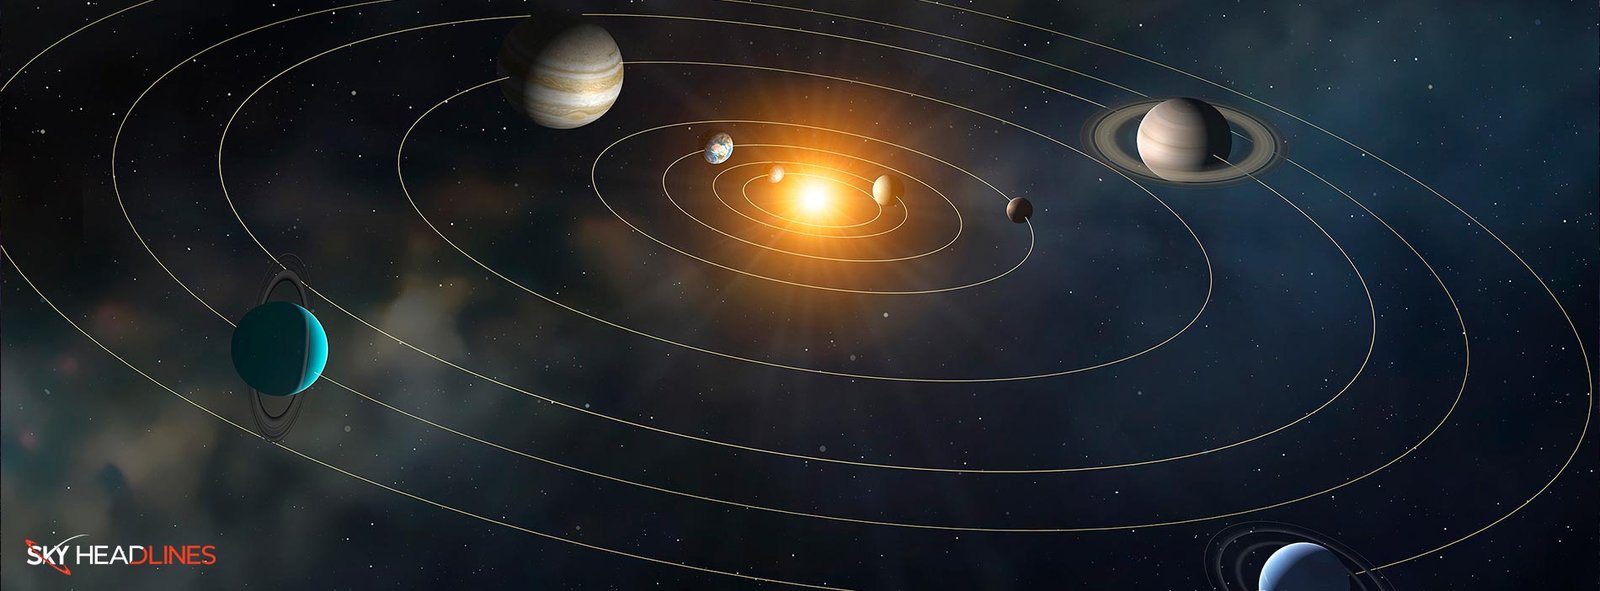 How Big is the Solar System